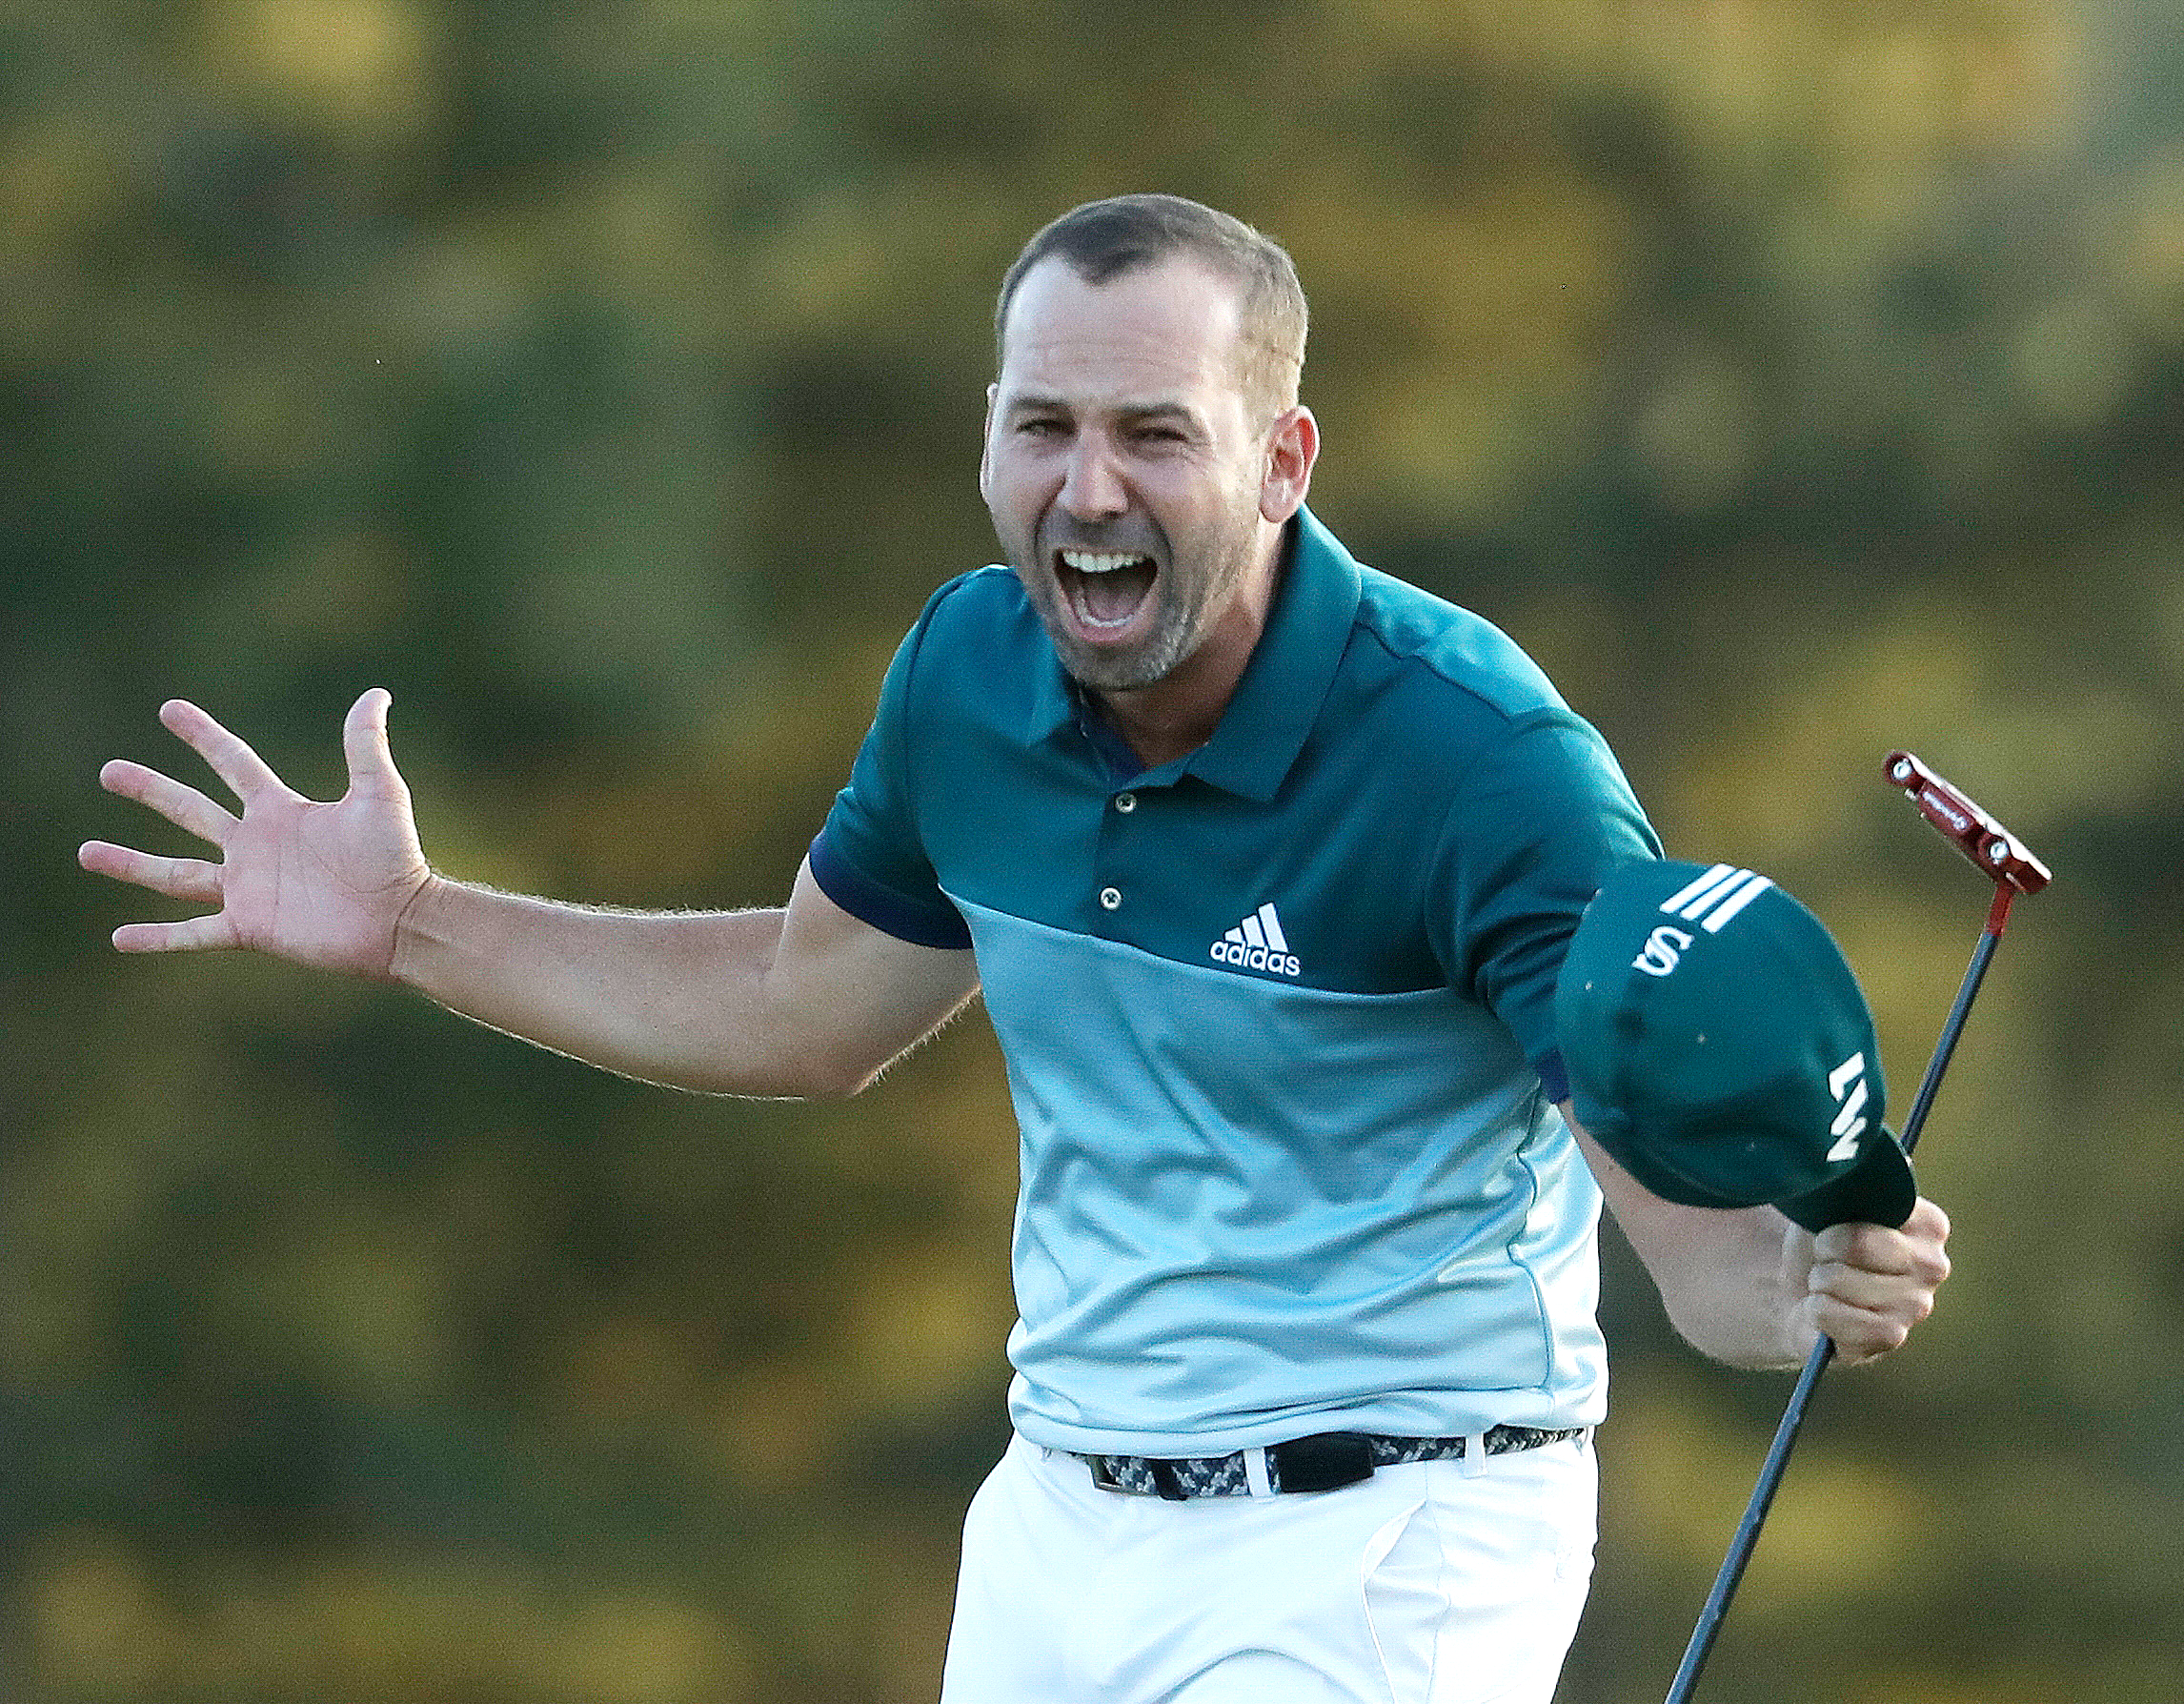 Sergio Garcia reacts after making his birdie putt on the 18th green to win the Masters golf tournament after a playoff Sunday, April 9, in Augusta, Ga. (AP Photo/Chris Carlson)